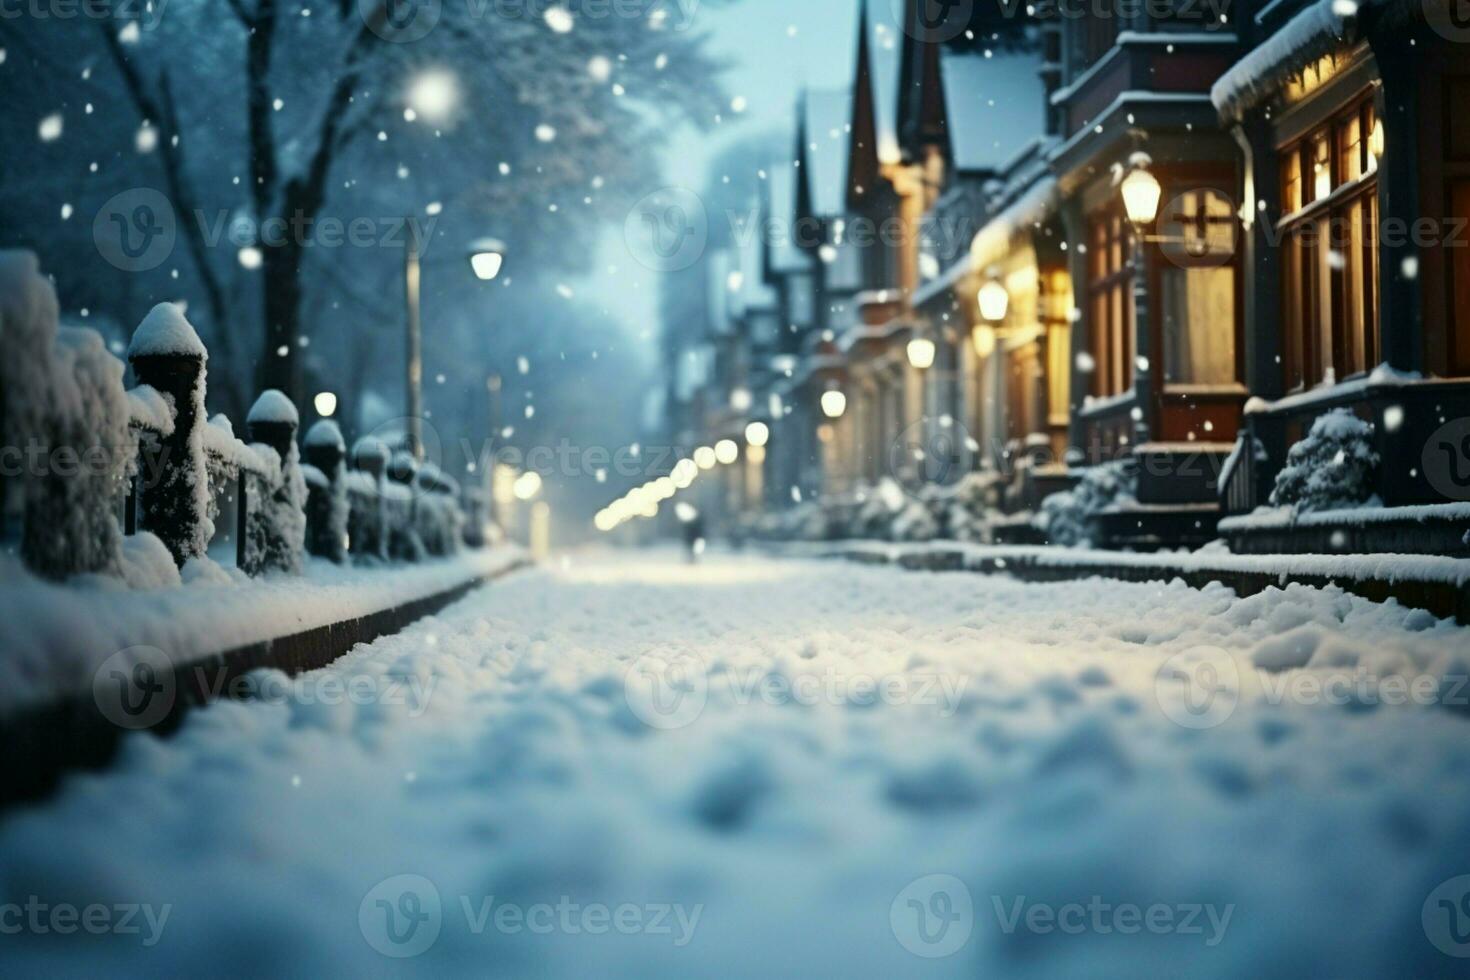 AI generated Gentle snowfall transforms the street into a serene winter wonderland photo